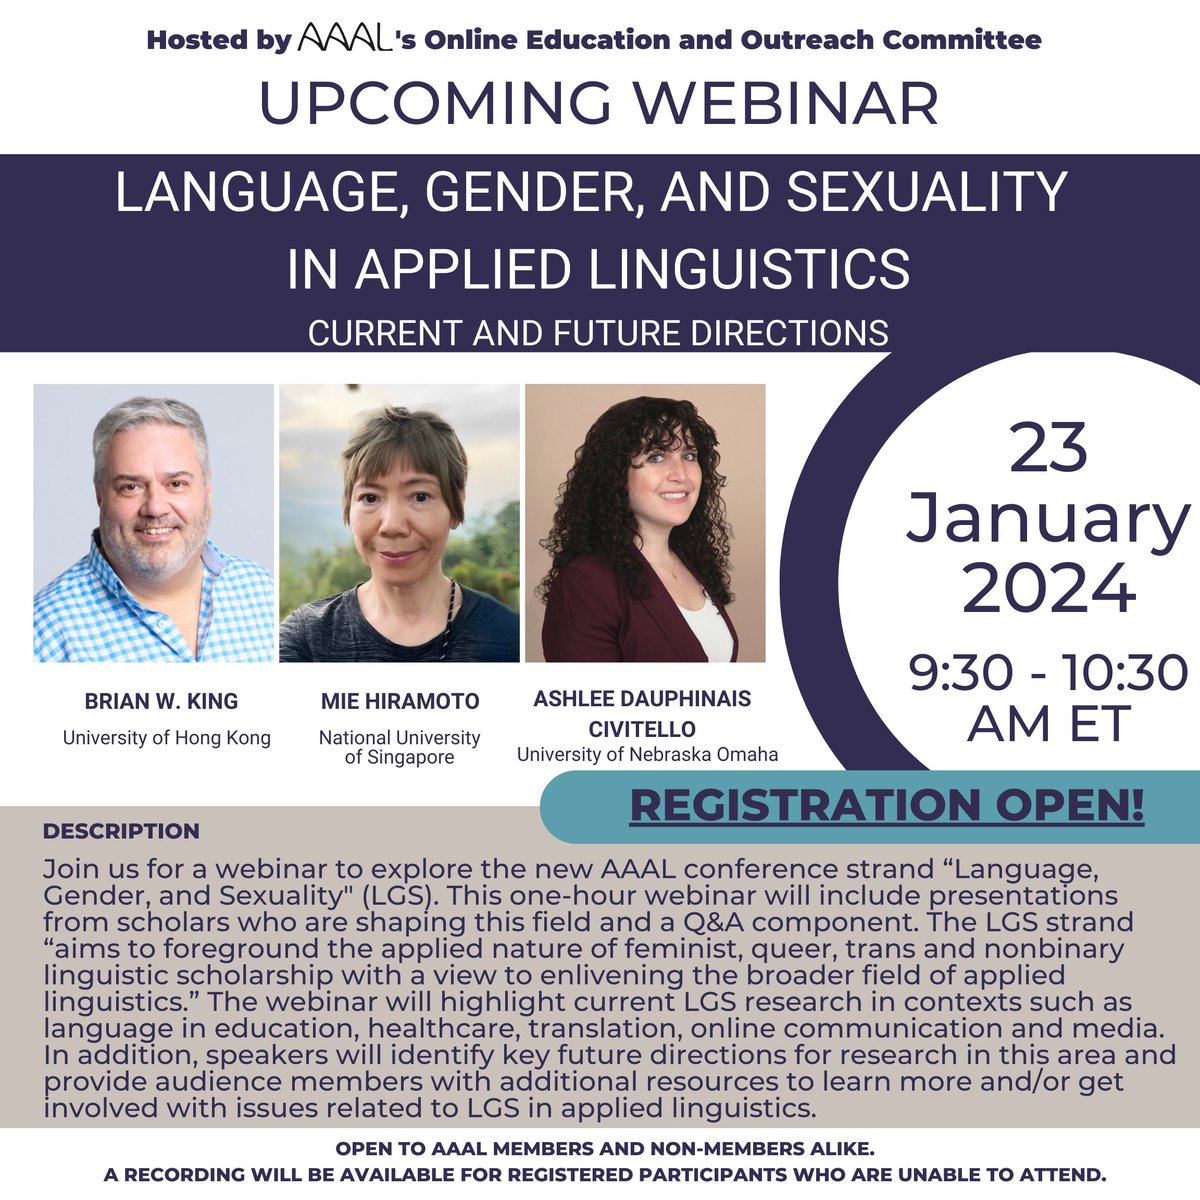 Join us to explore the new AAAL conference strand 'Language, Gender, and Sexuality' (LGS) on January 23 @ 9:30am ET. Get insights from leading scholars, engage in a Q&A, and discover the applied nature of LGS in education, healthcare, and more. Register: aaal.org/events/aaal-we…